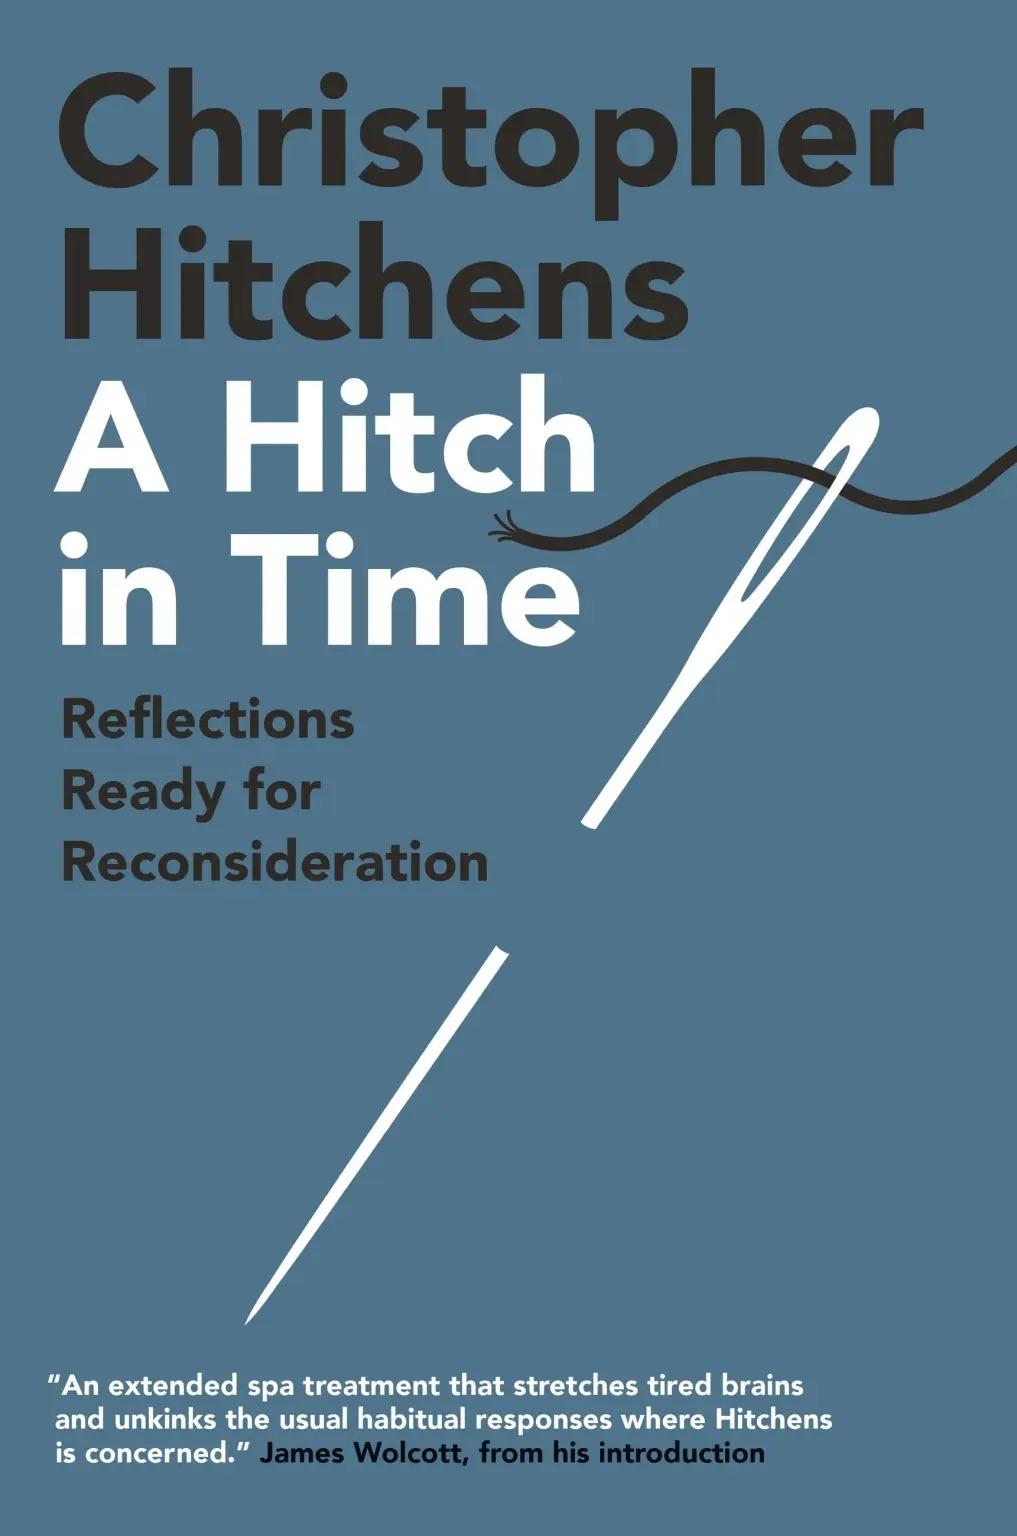 Why Hitch Still Matters: On Christopher Hitchens's "A Hitch in Time"